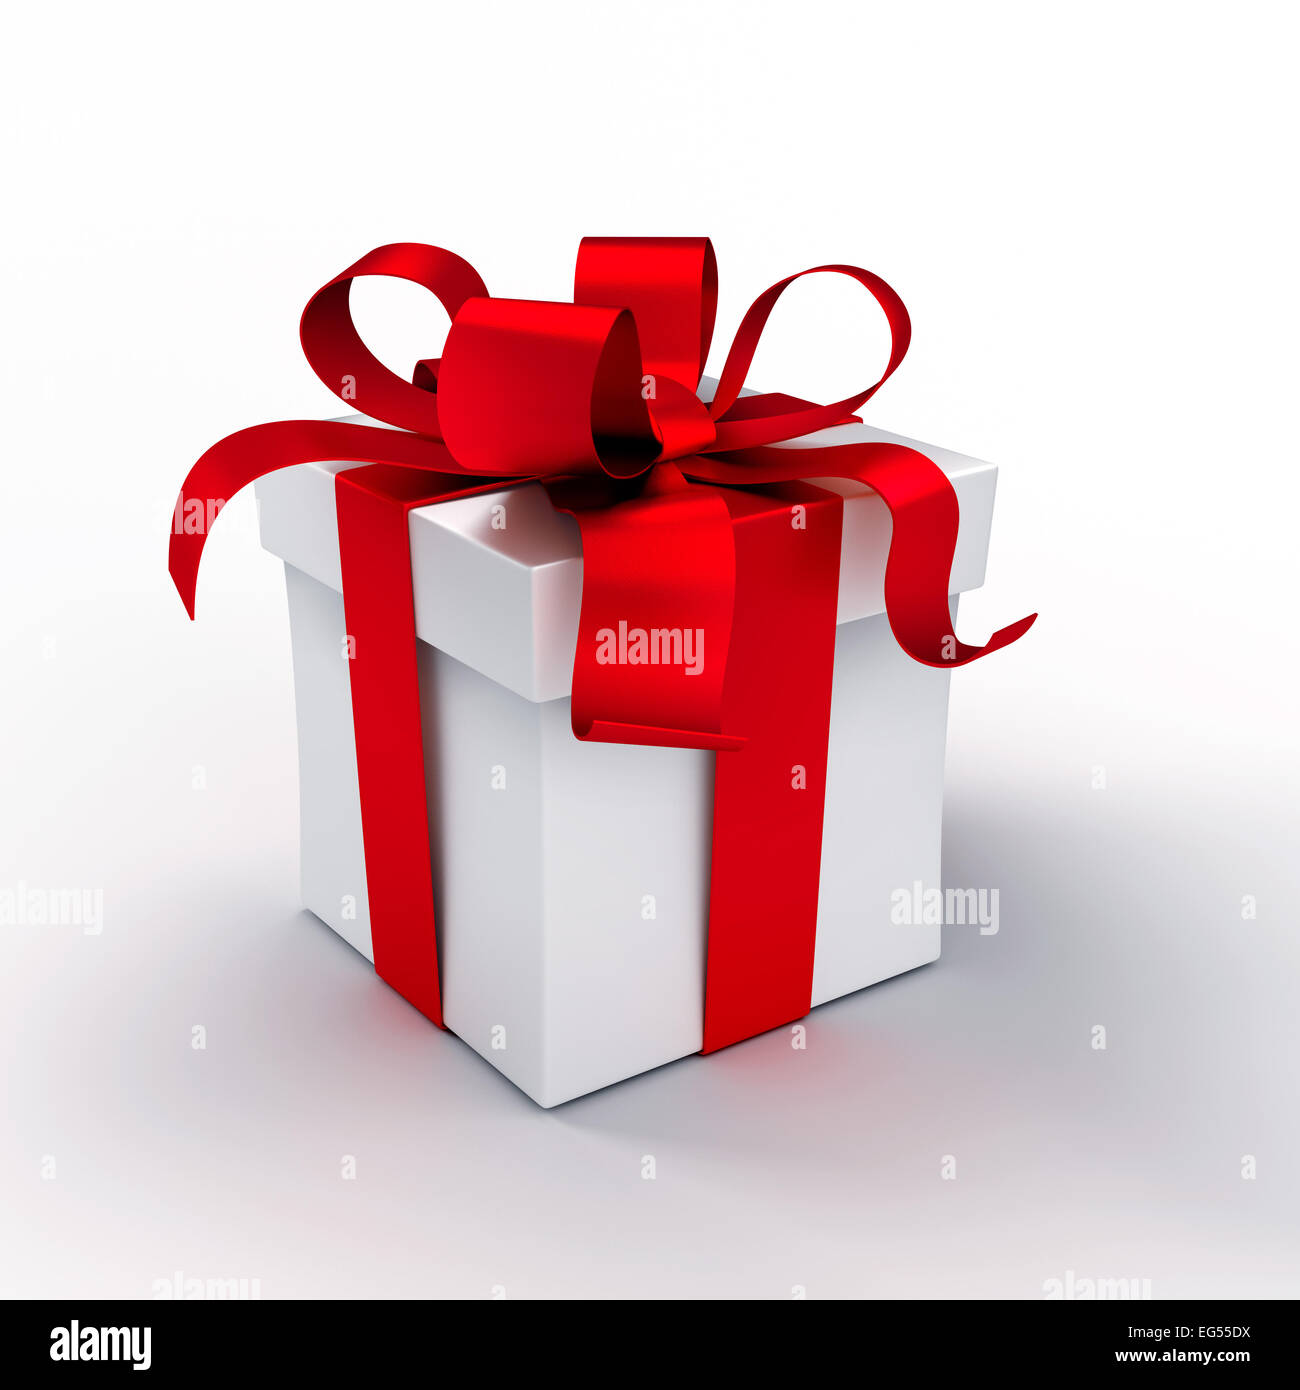 White gift box tied up with red ribbons, isolated on white Stock Photo